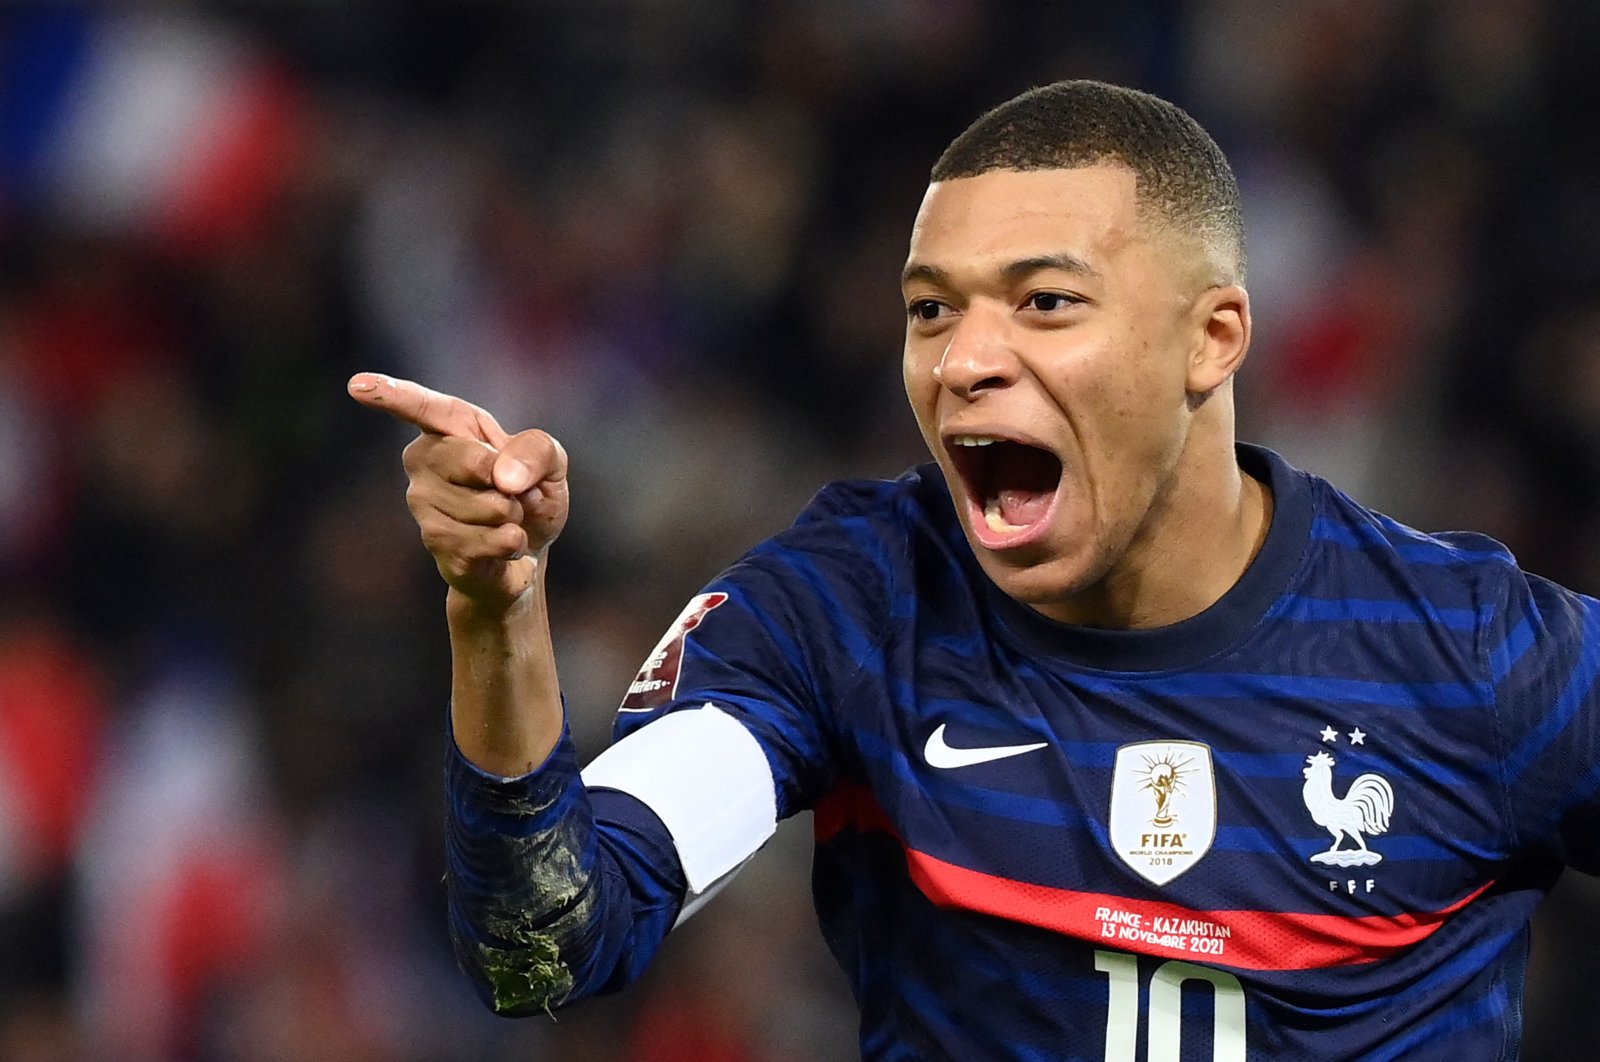 France's forward Kylian Mbappe celebrates after scoring a goal during the FIFA World Cup 2022 qualification football match between France and Kazhkastan at the Parc des Princes stadium in Paris, on November 13, 2021. (AFP Photo)